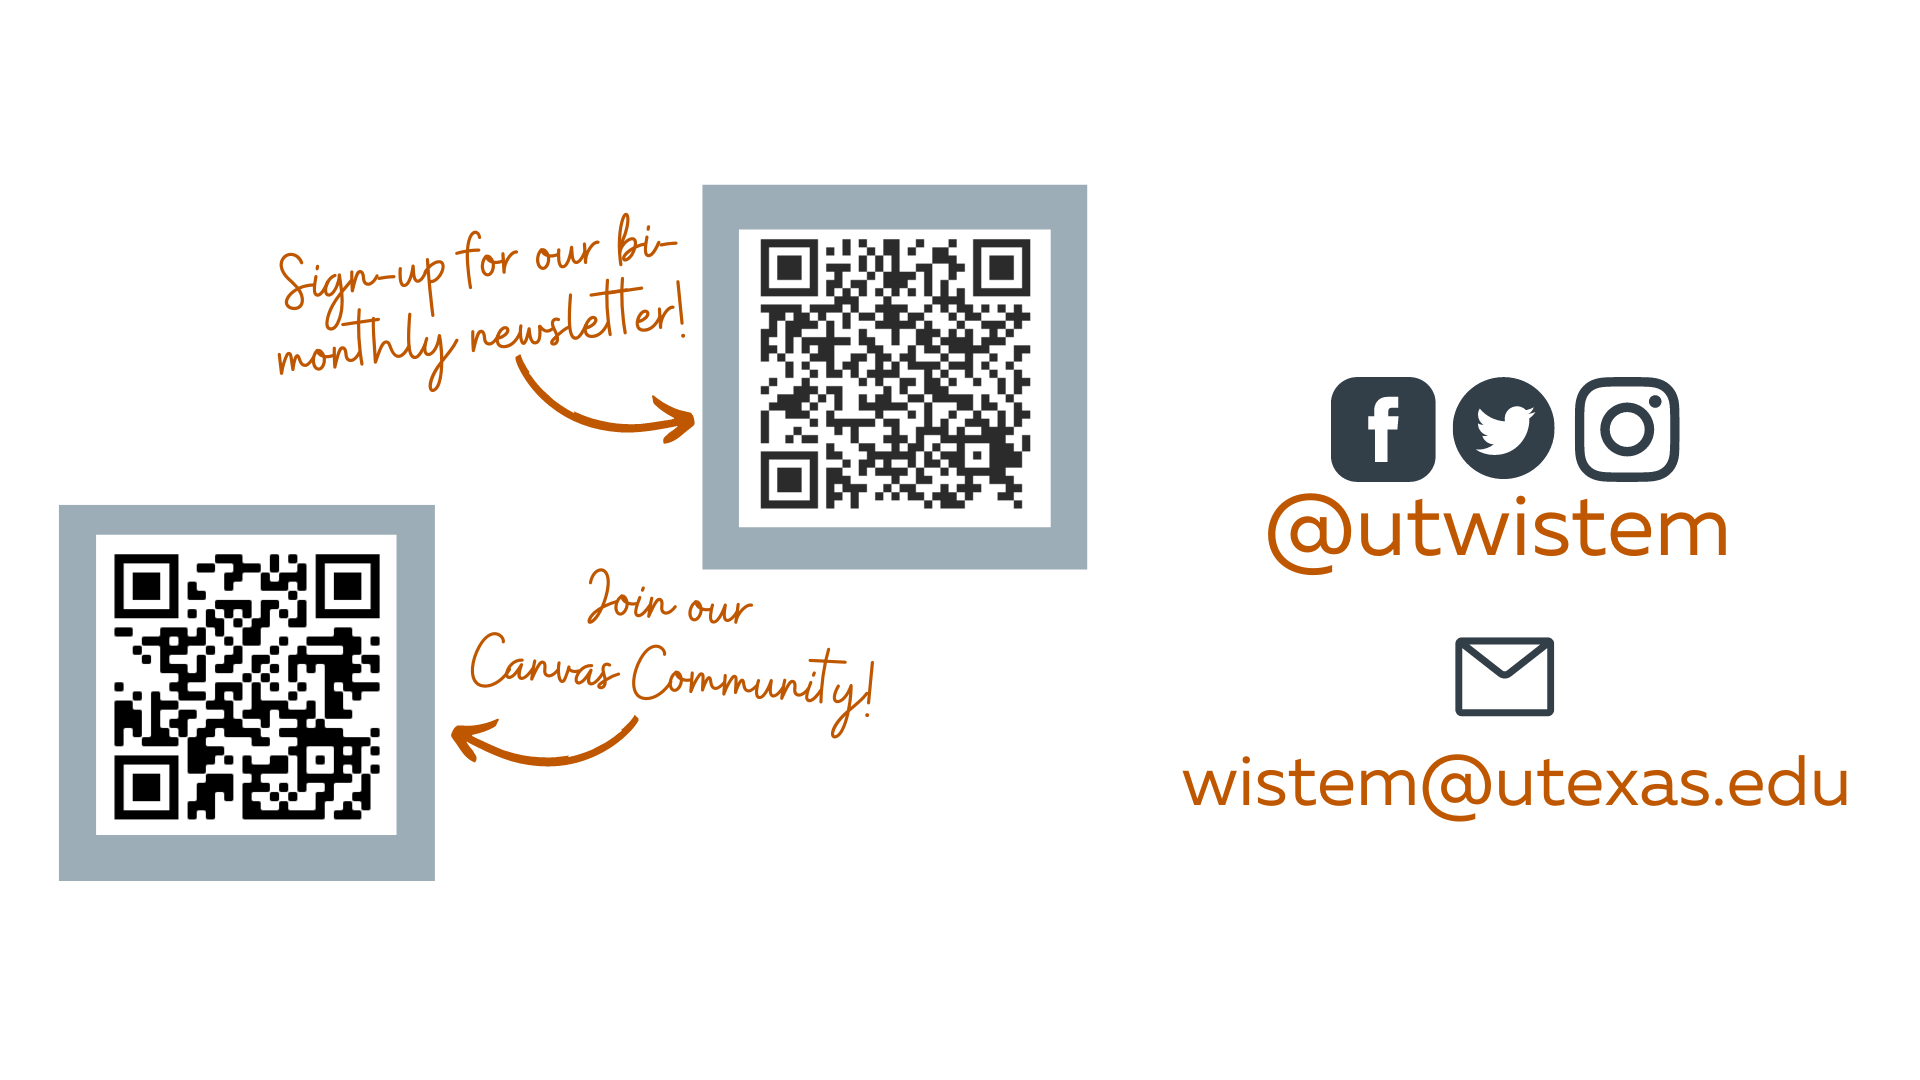 QR Codes for joining the WiSTEM Canvas Community and signing up for the WiSTEM newsletter. Social media handles for facebook, twitter and instagram is @utwistem. Email address is wistem@utexas.edu